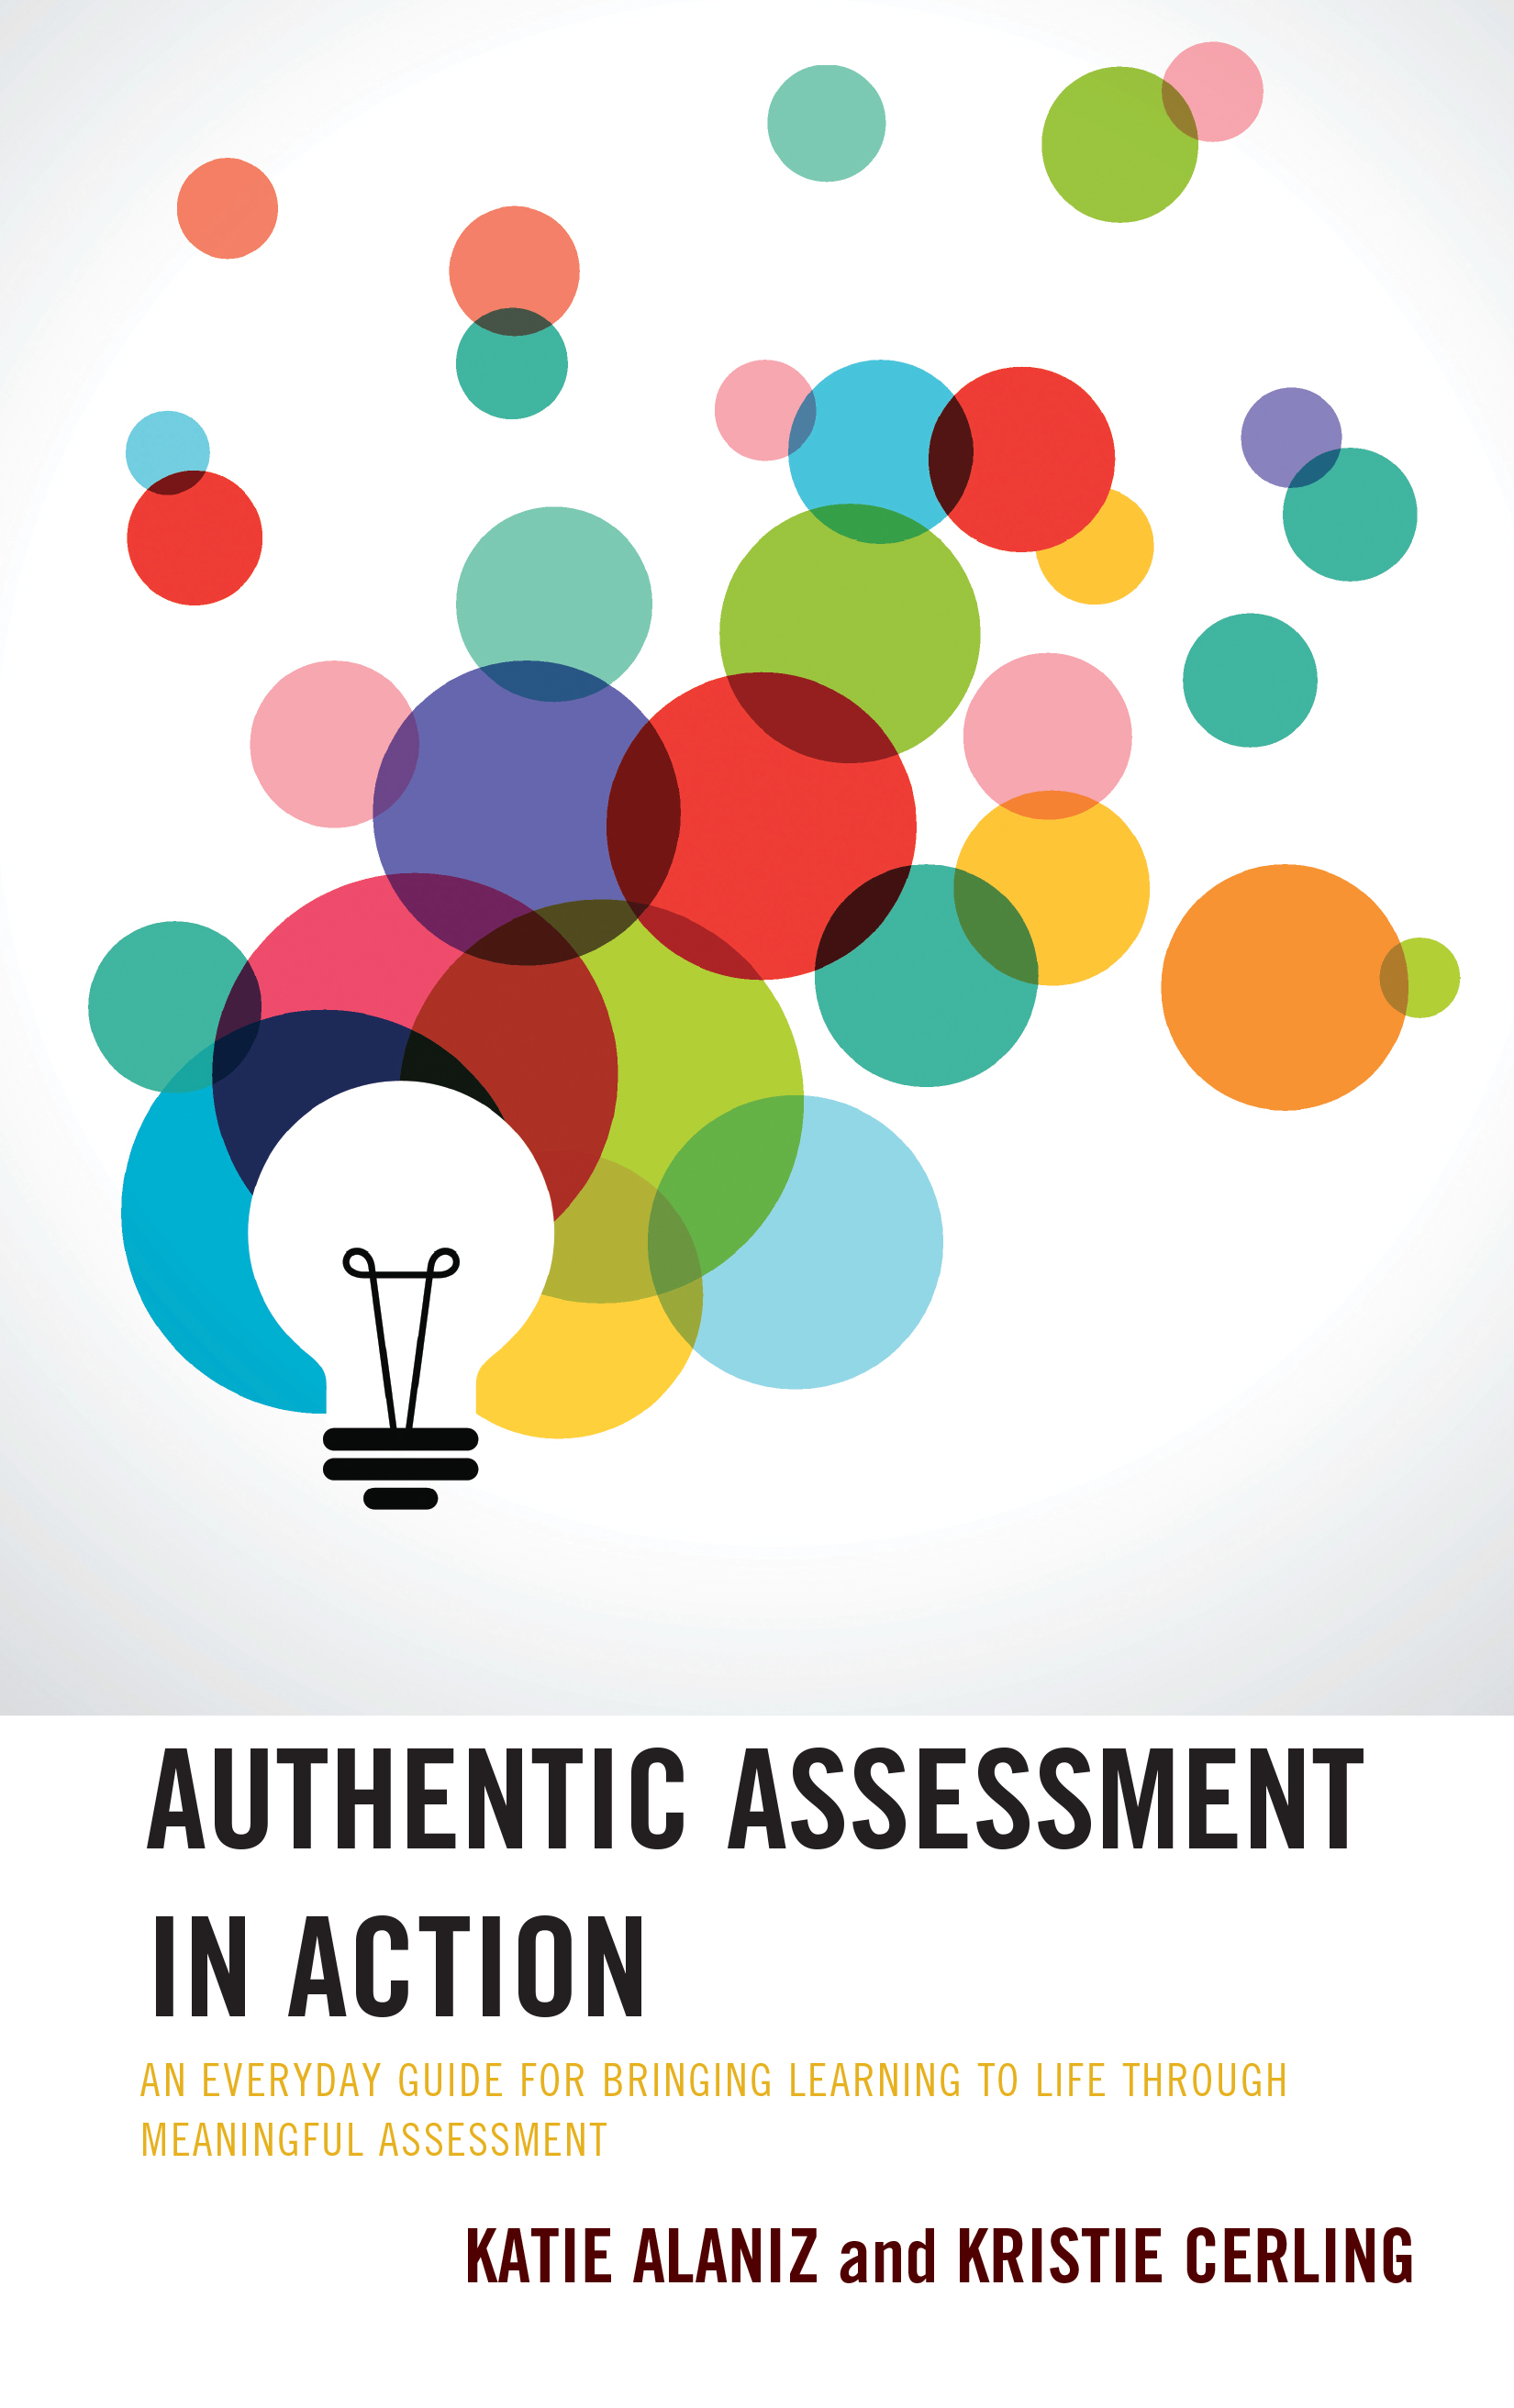 Authentic Assessment in Action: An Everyday Guide for Bringing Learning to Life through Meaningful Assessment